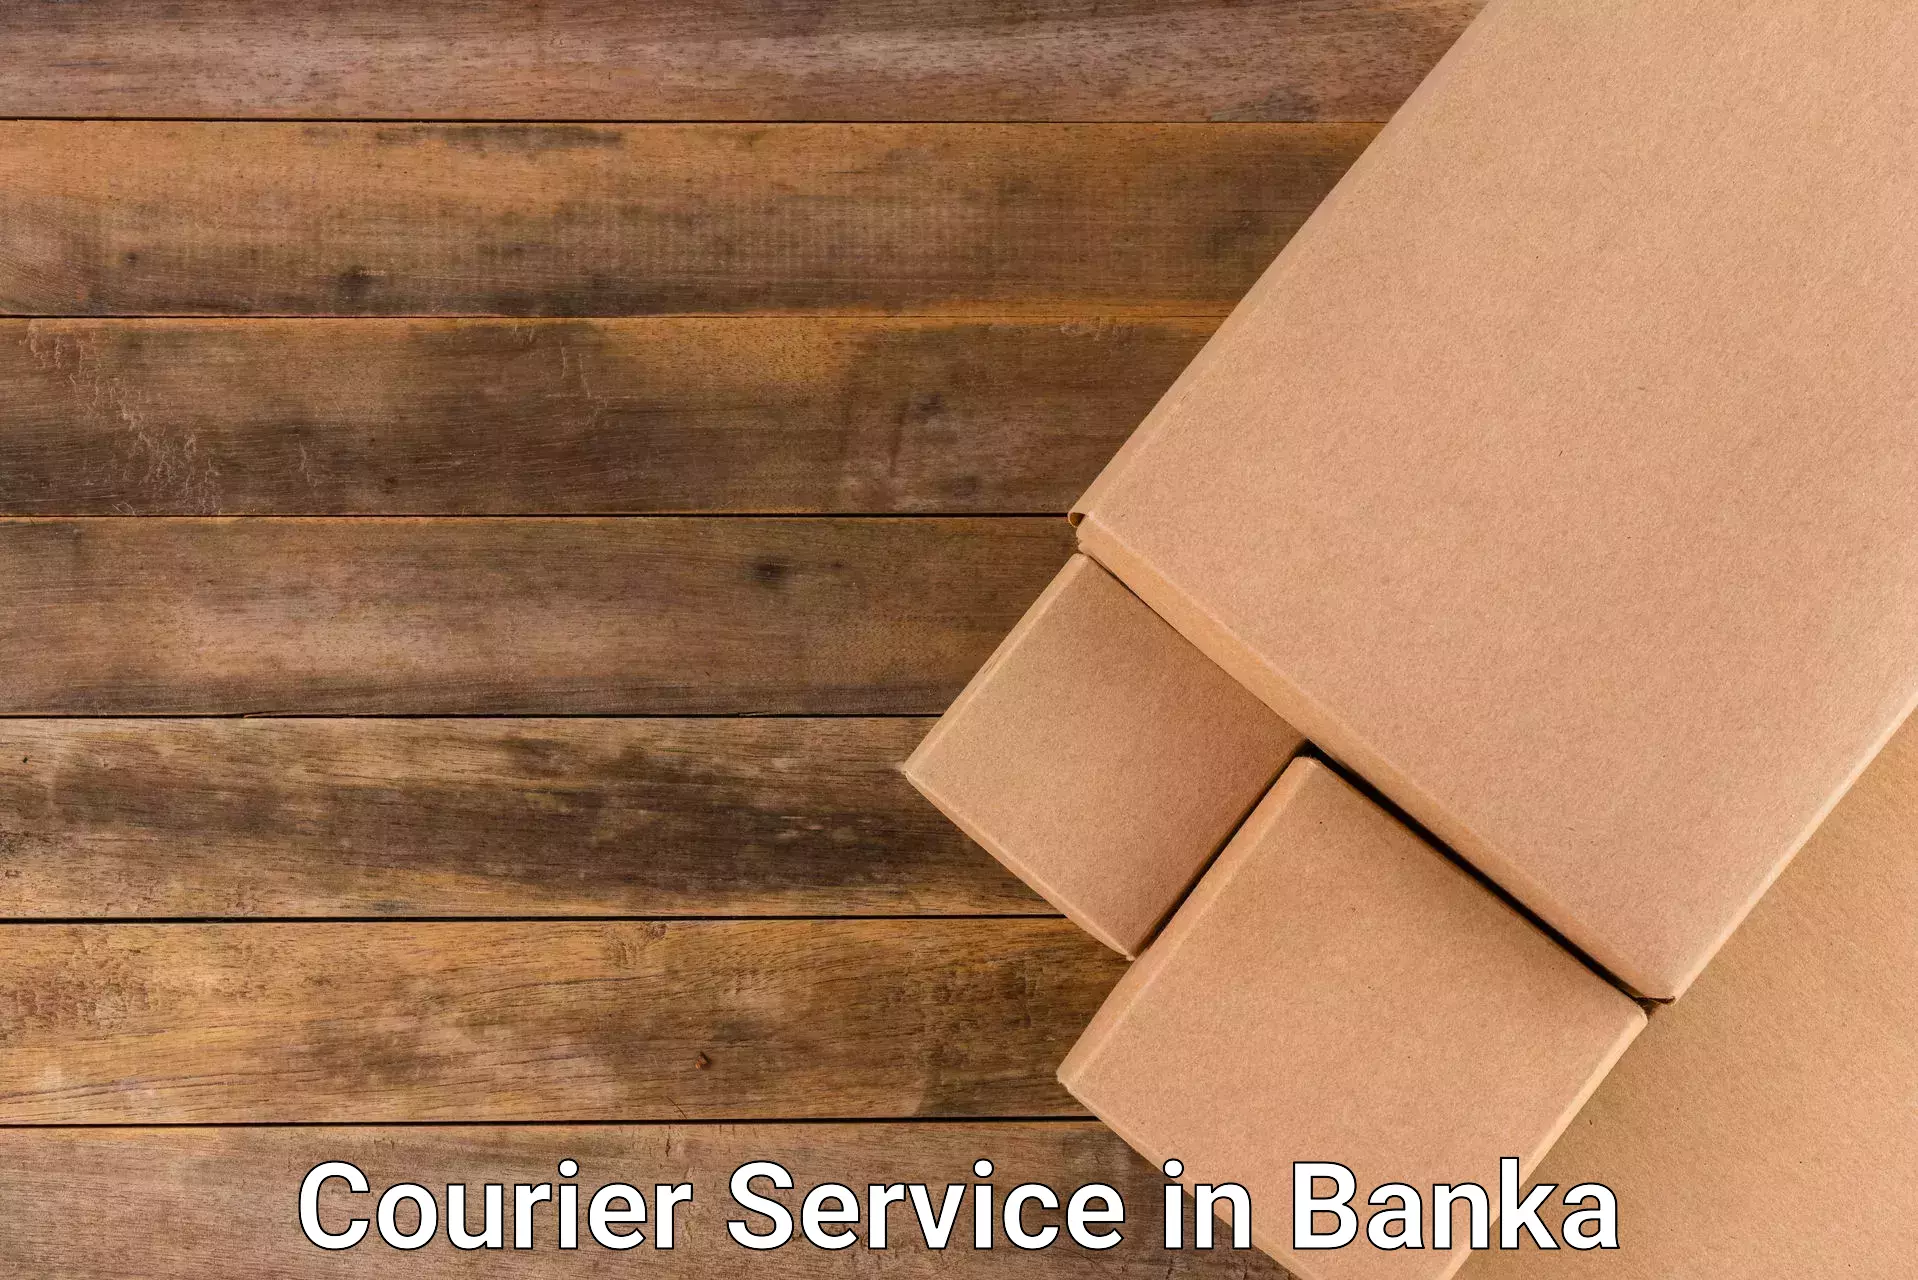 Expedited shipping methods in Banka